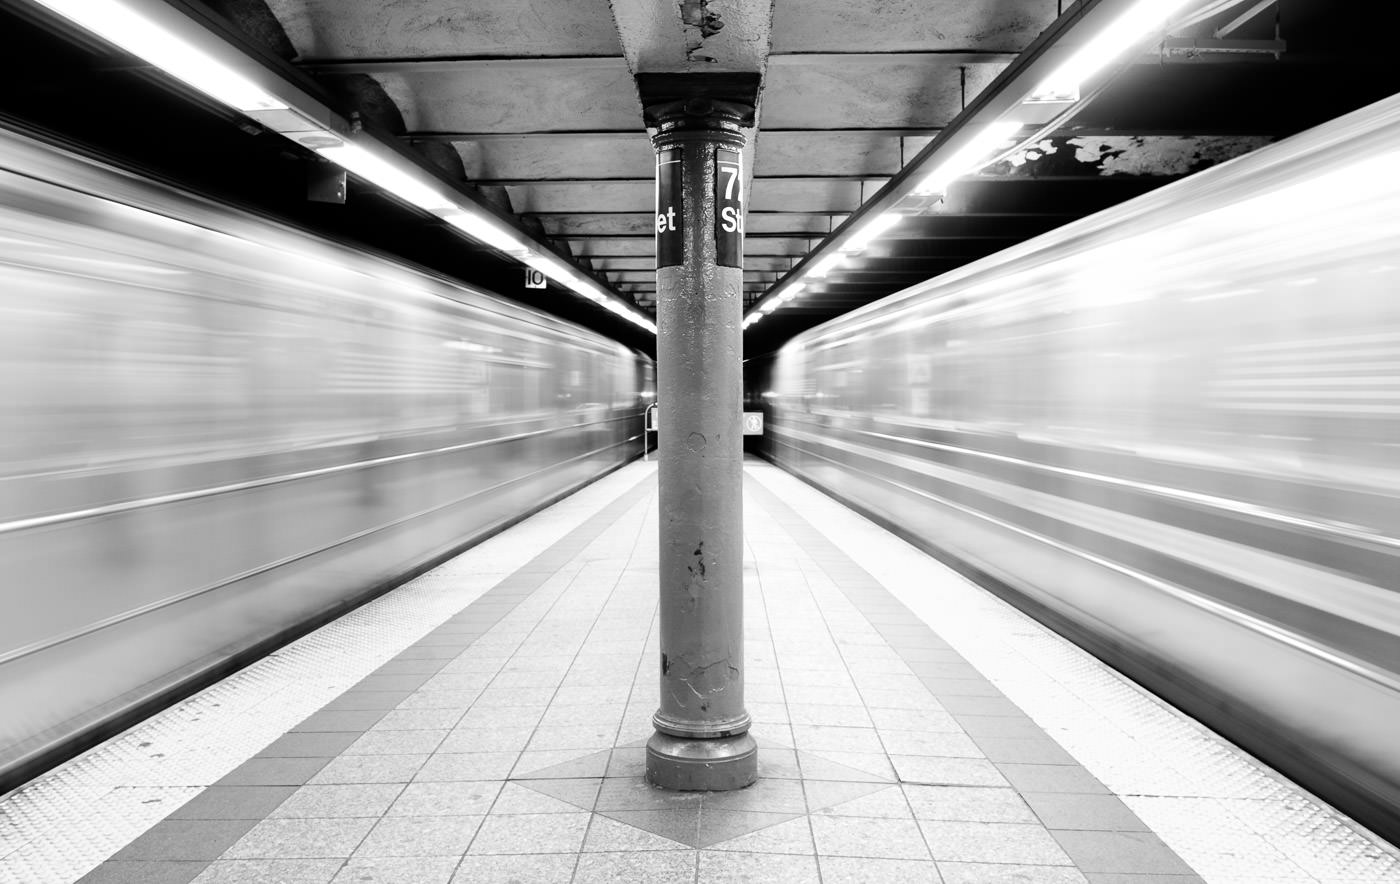 NYC Subway trains rushing by on both sides of platform, creating blurred space around the centre